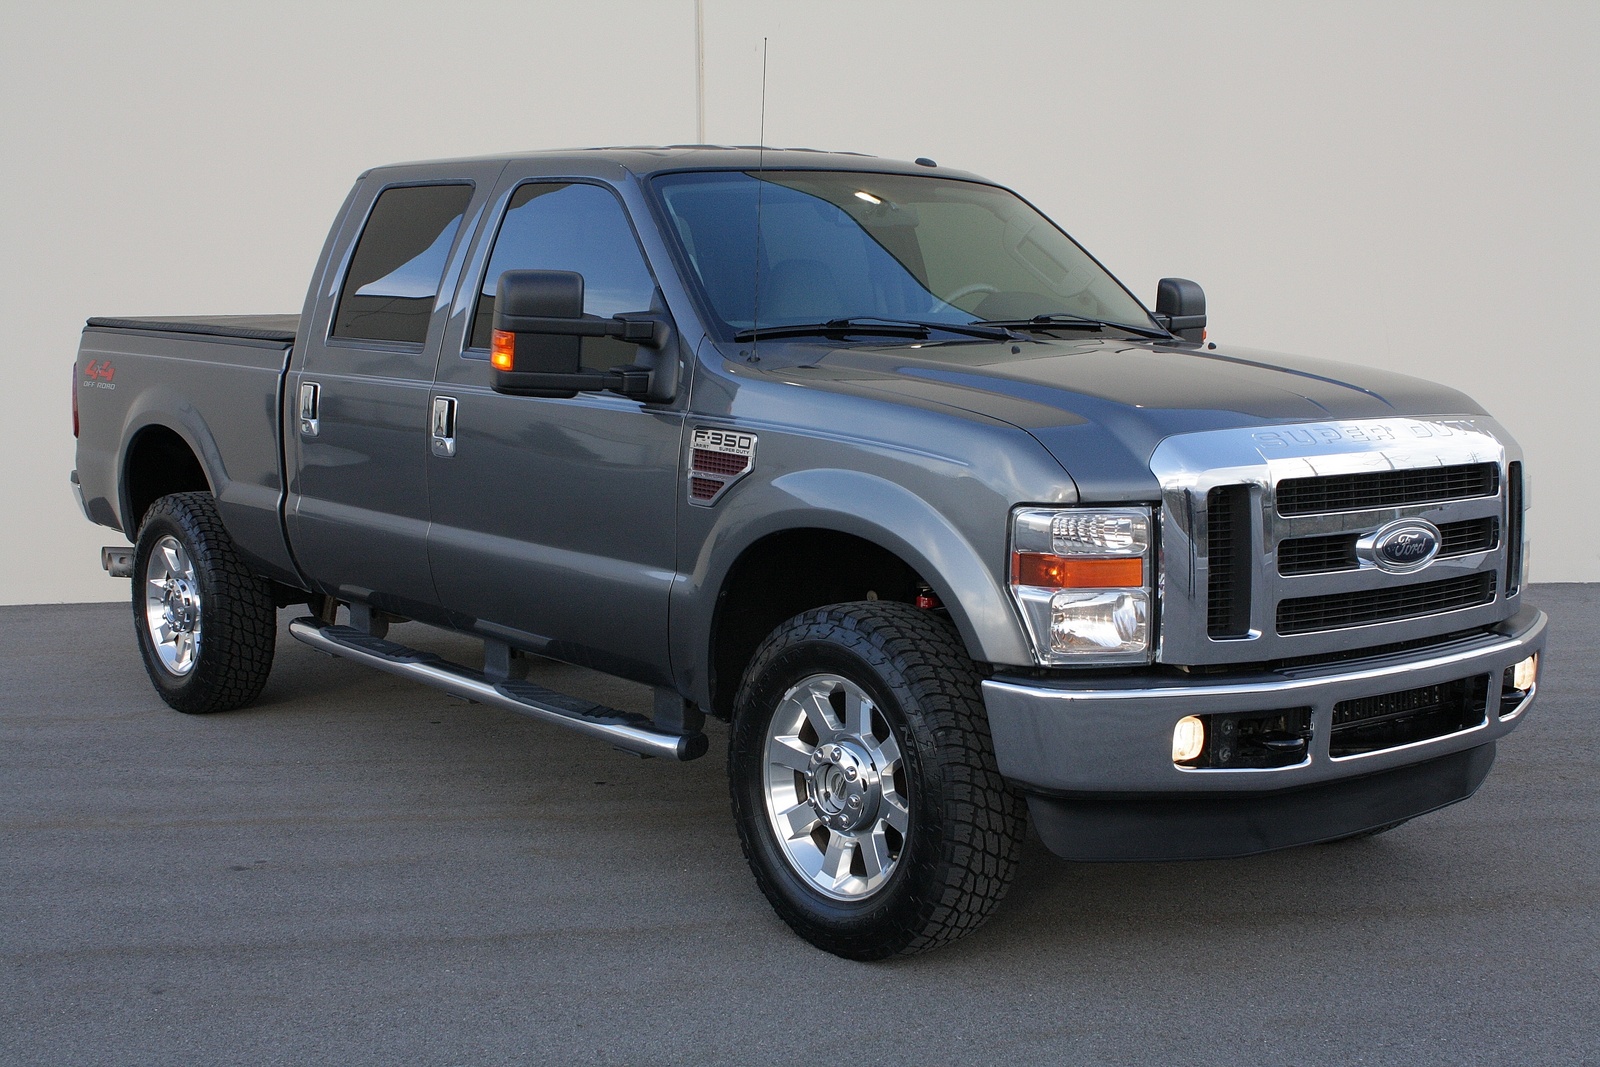 2009 Ford super duty specs #8